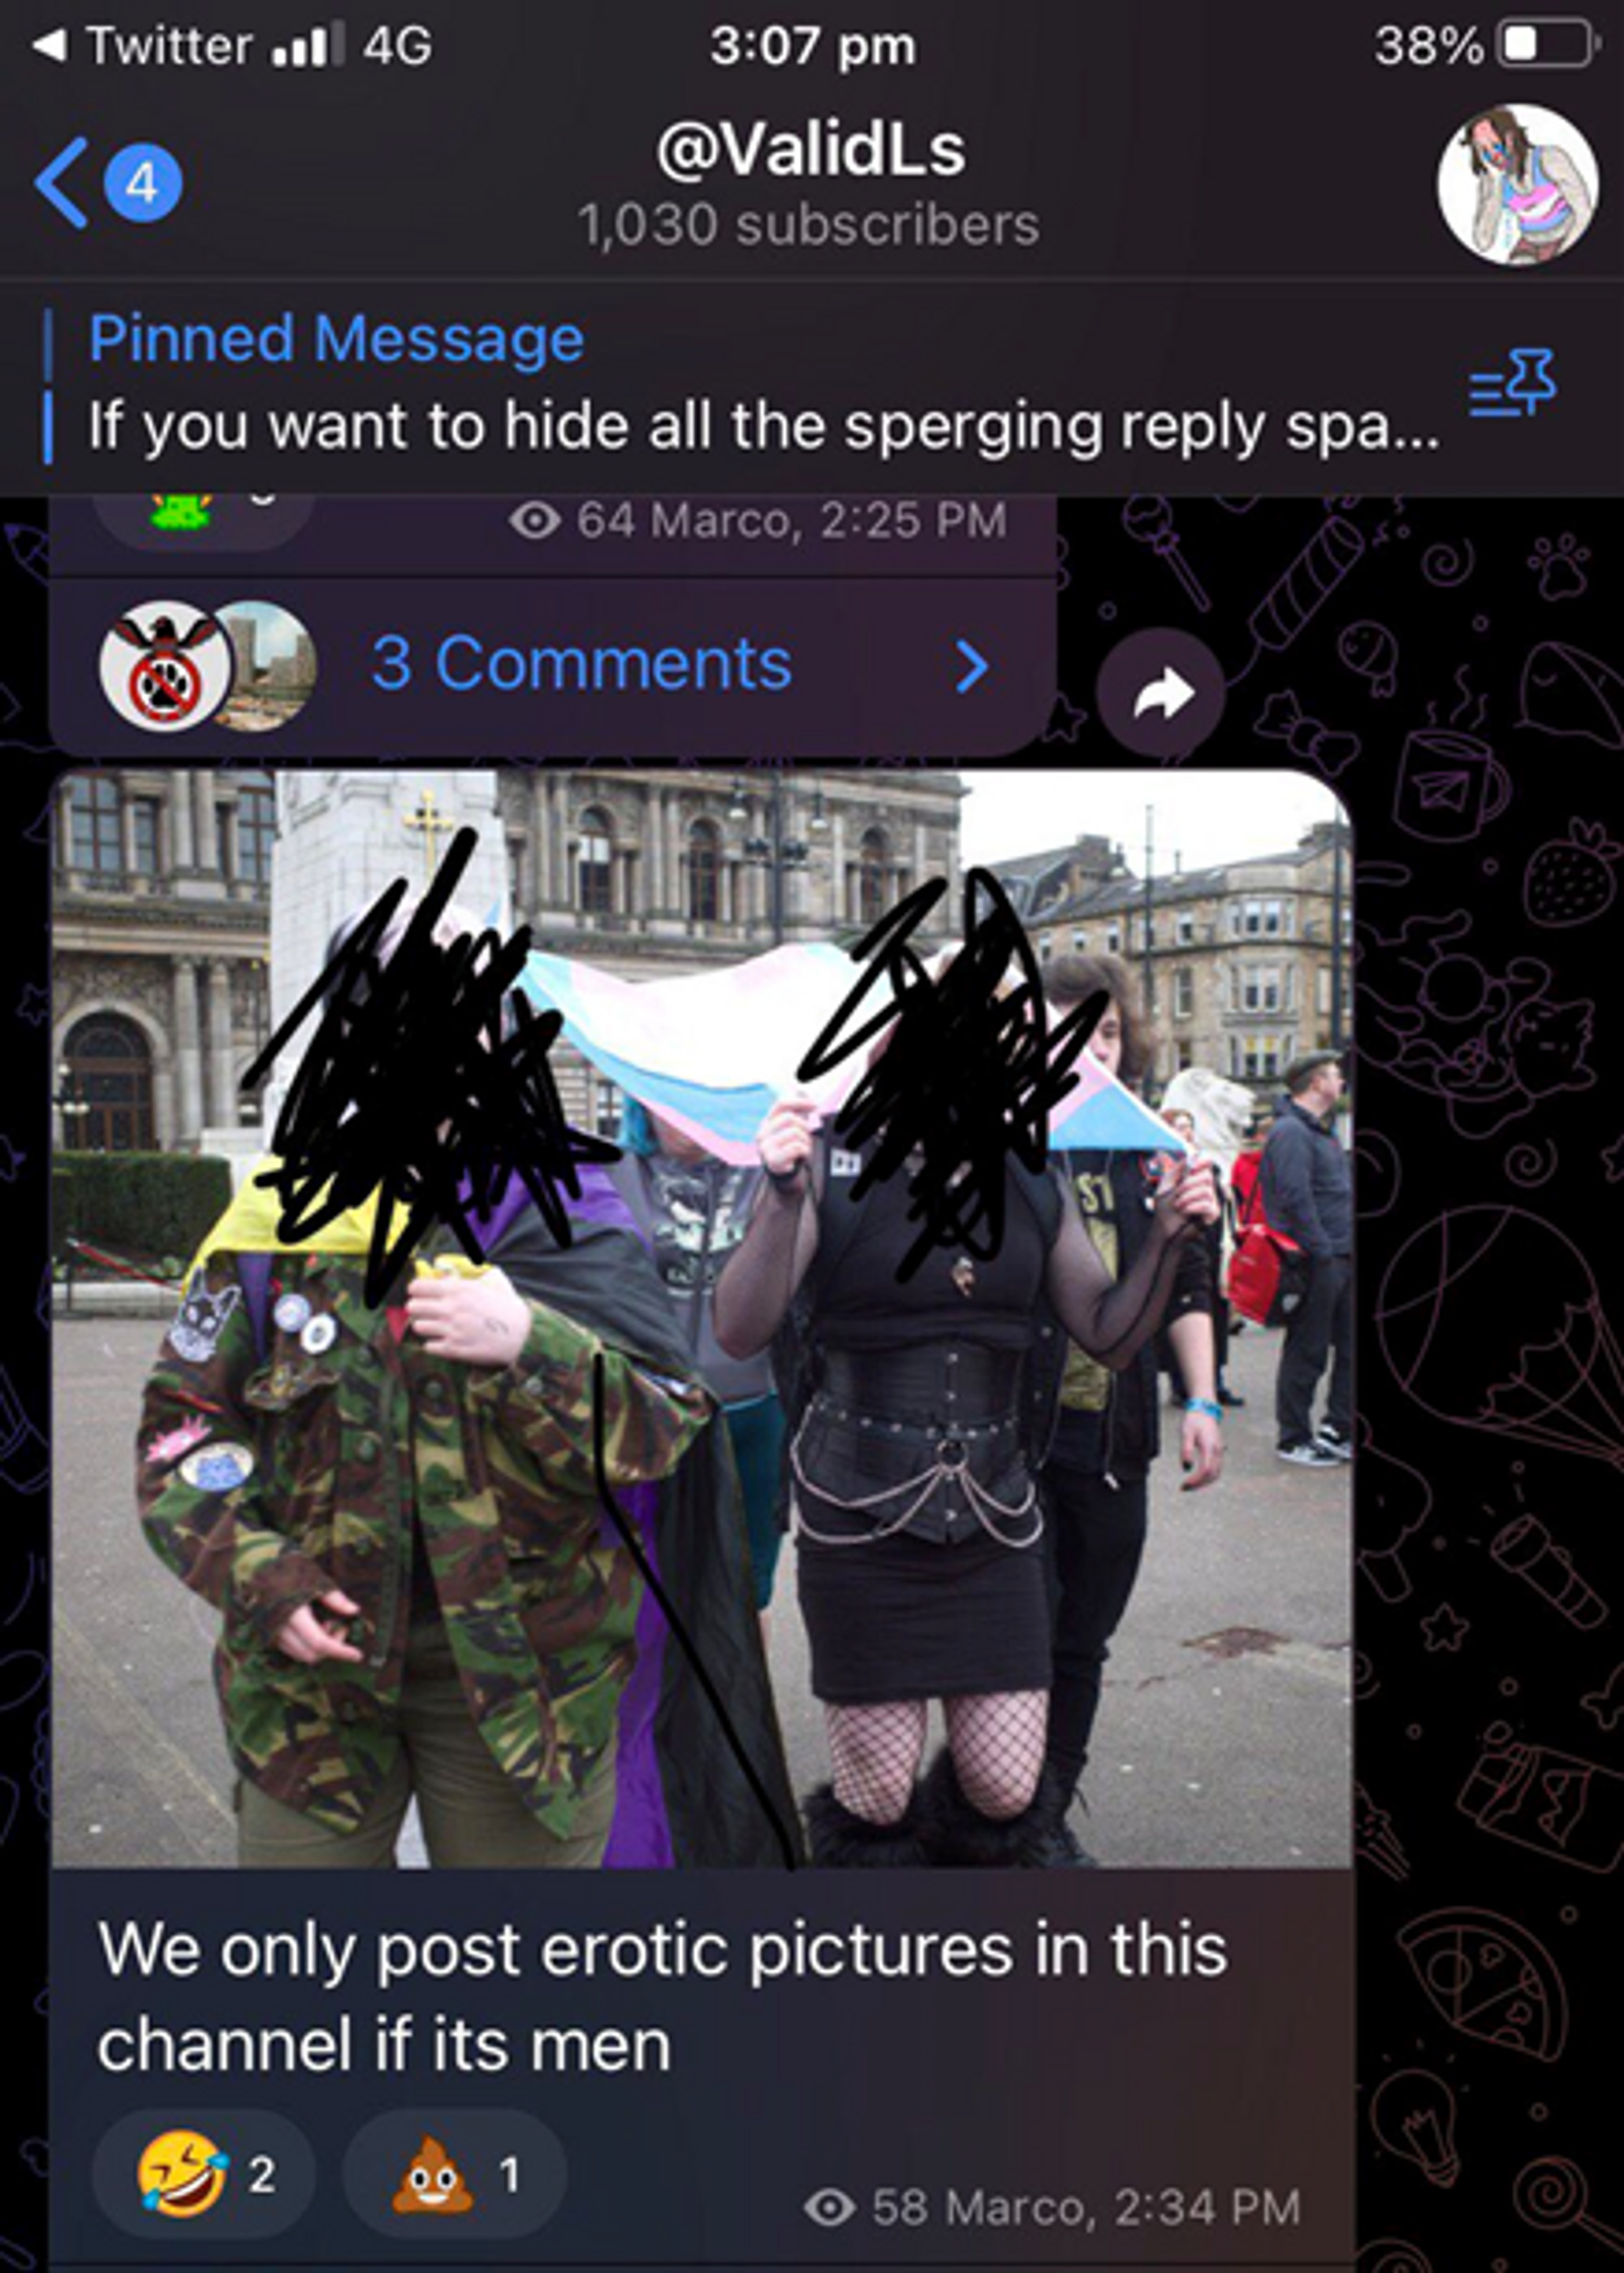 Screenshot from Telegram channel for ValidLs: Two trans people pictured (identities obscured by TSN). Captioned "We only post erotic pictures in this channel if it's men"